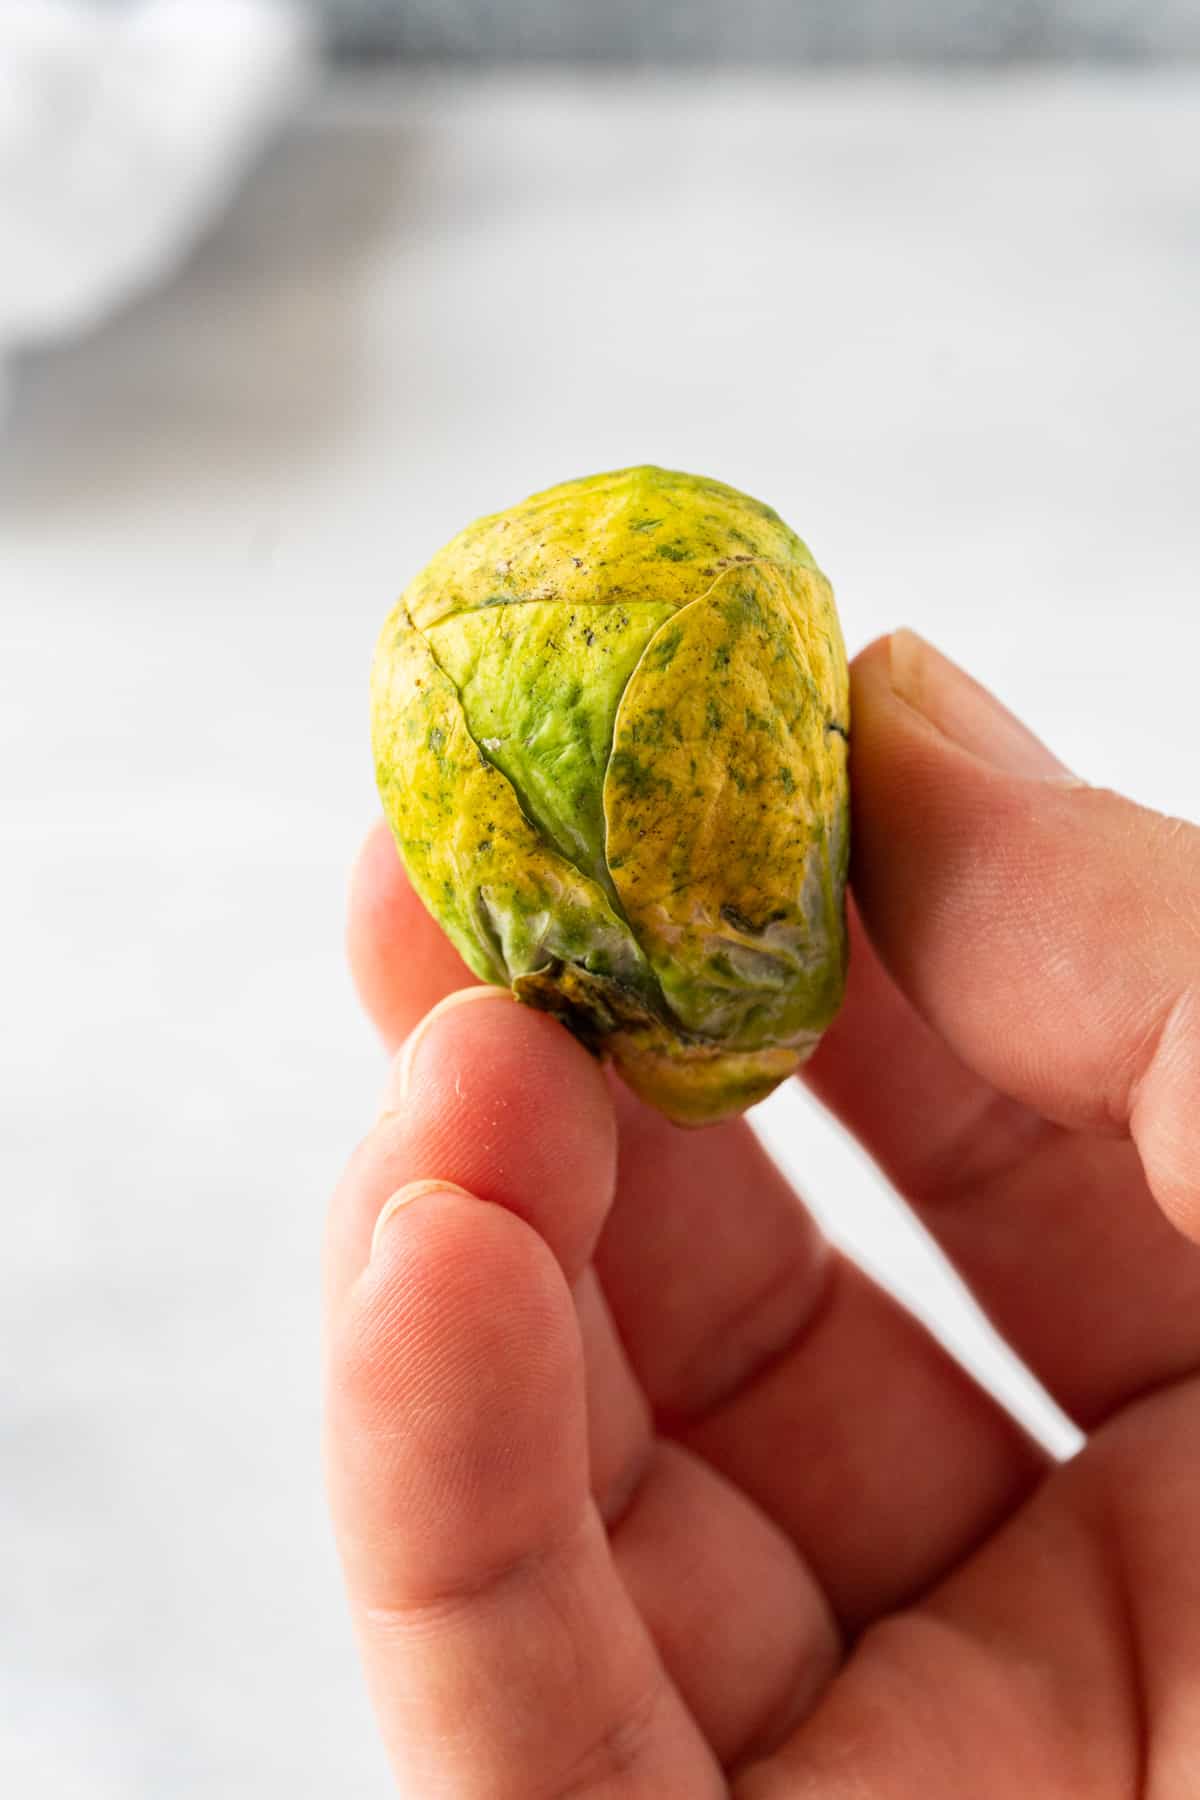 really yellow old brussel sprout